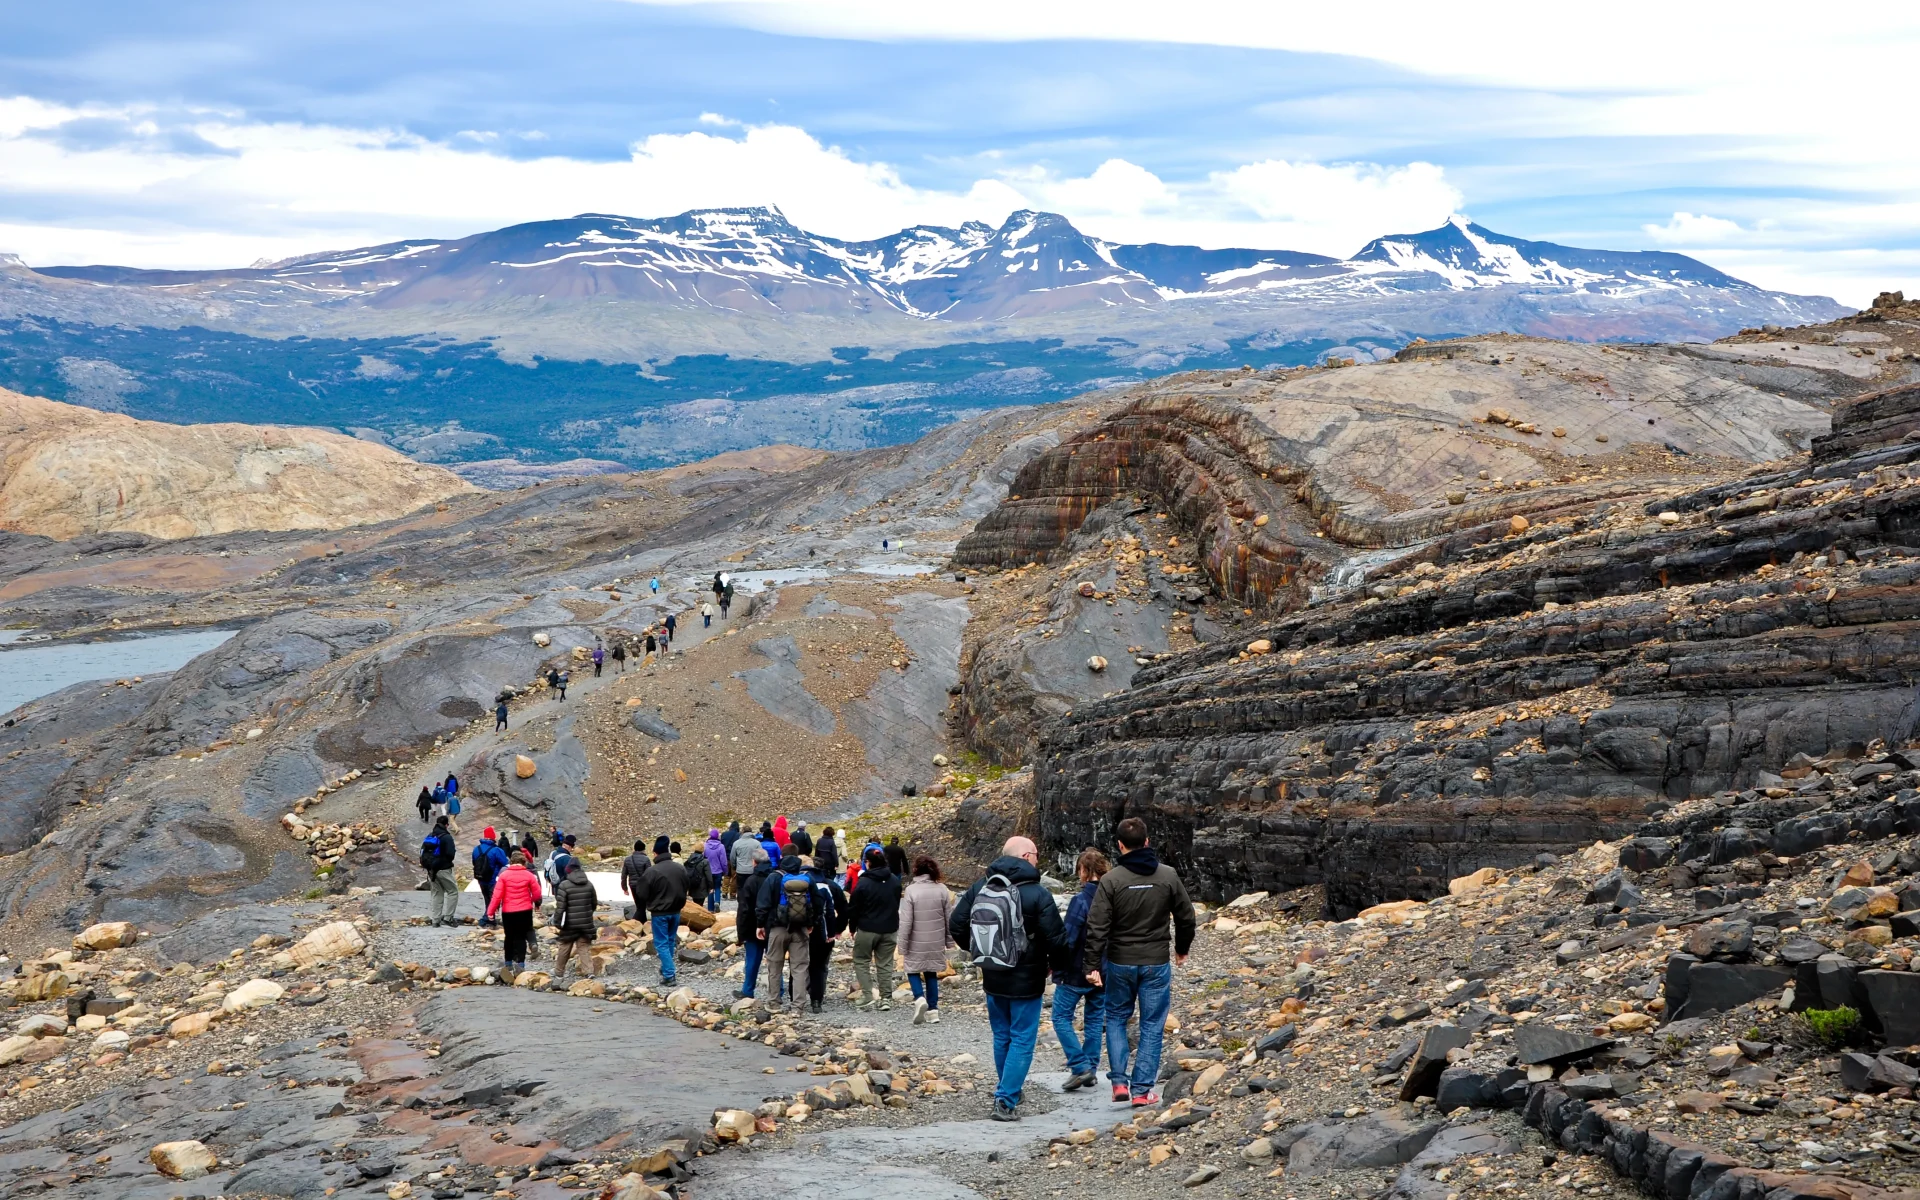 A group of people are out on a walking excursion leading down a rocky pathway towards a beautiful mountain scenery.